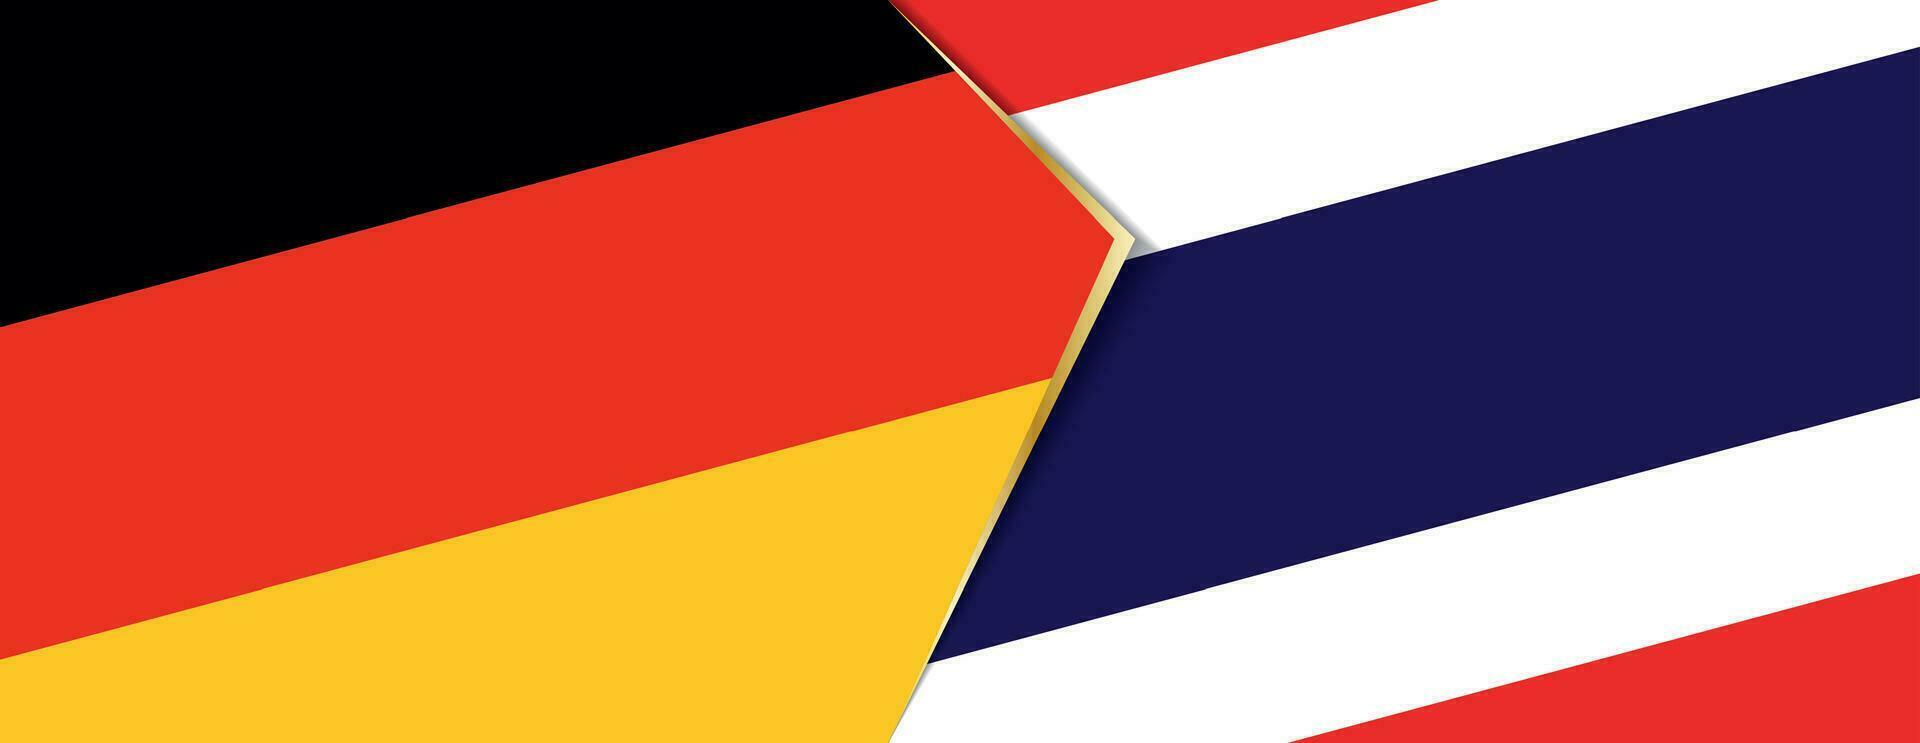 Germany and Thailand flags, two vector flags.